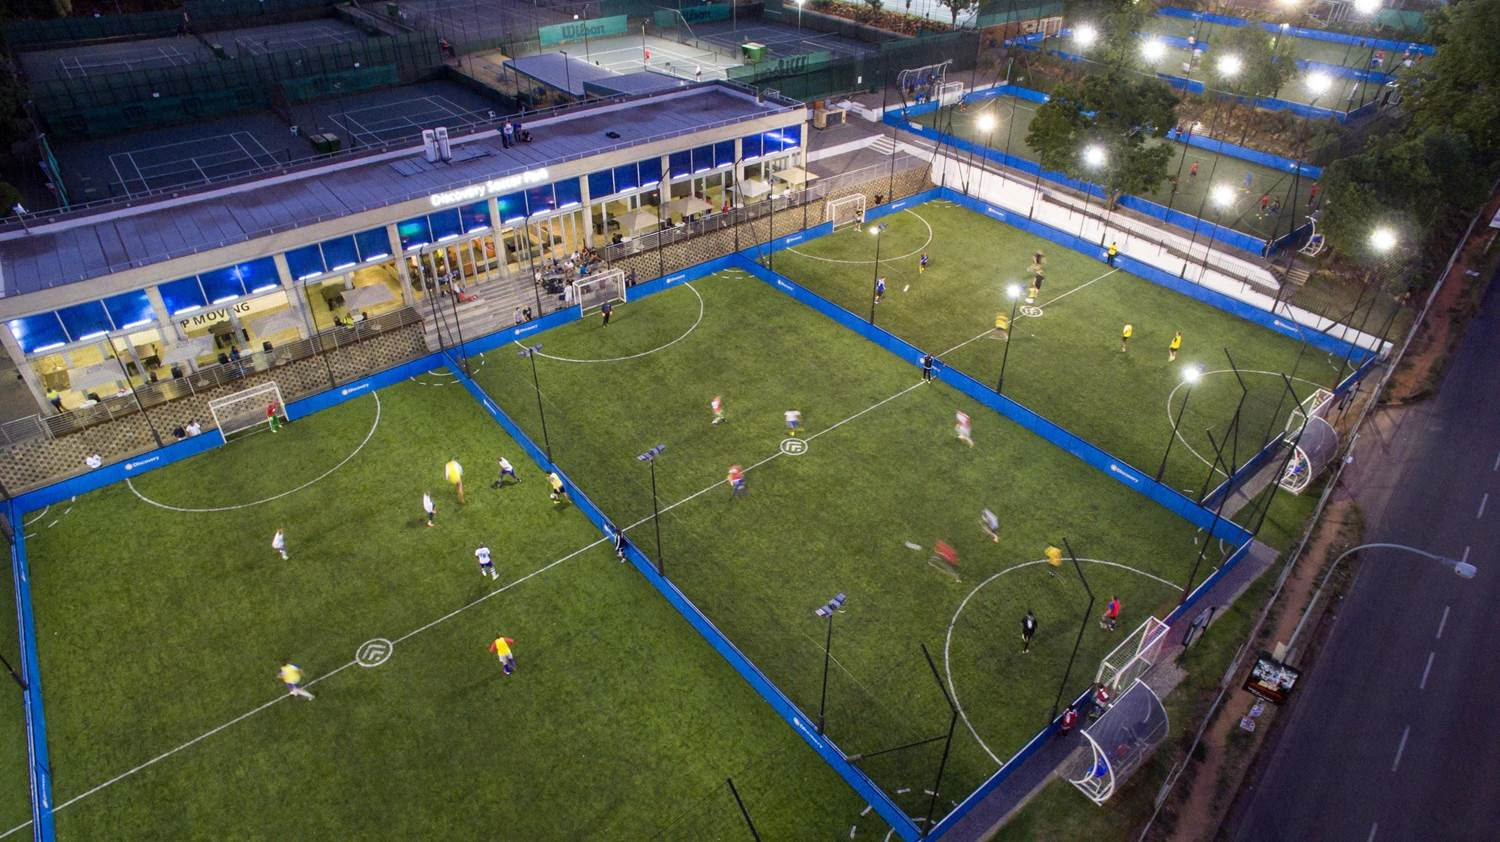 Discovery Soccer Park contact us